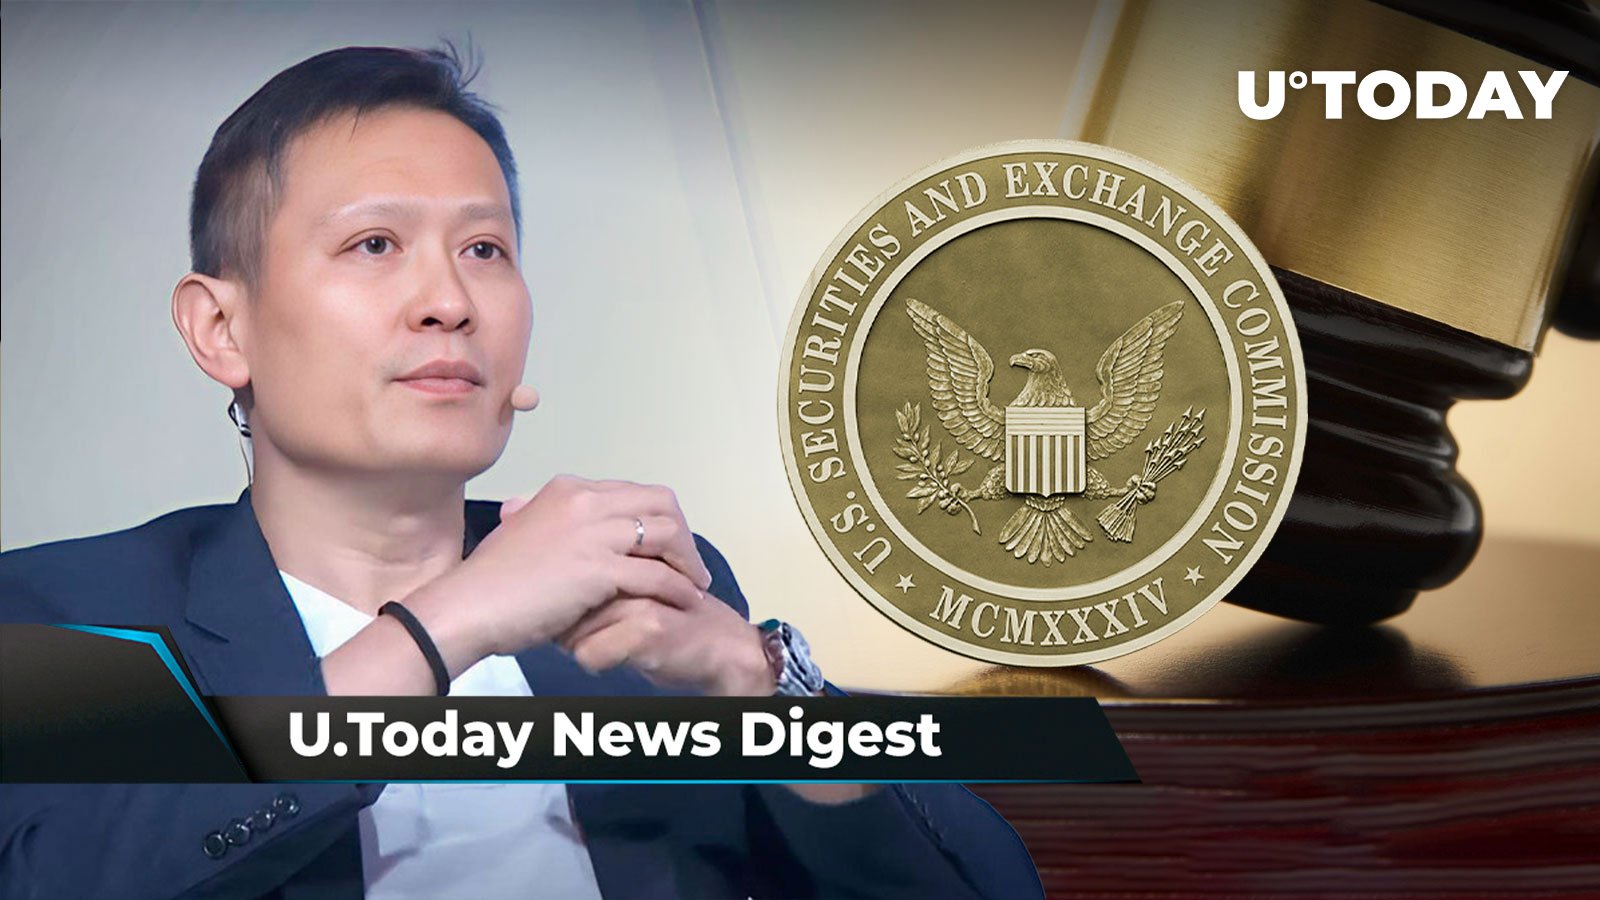 SEC Announces Private Meeting, New Binance CEO Addresses .3 Billion Fine; SHIB, BTC, ETH Offer New Way to Pay Mortgage: Crypto News Digest by U.Today